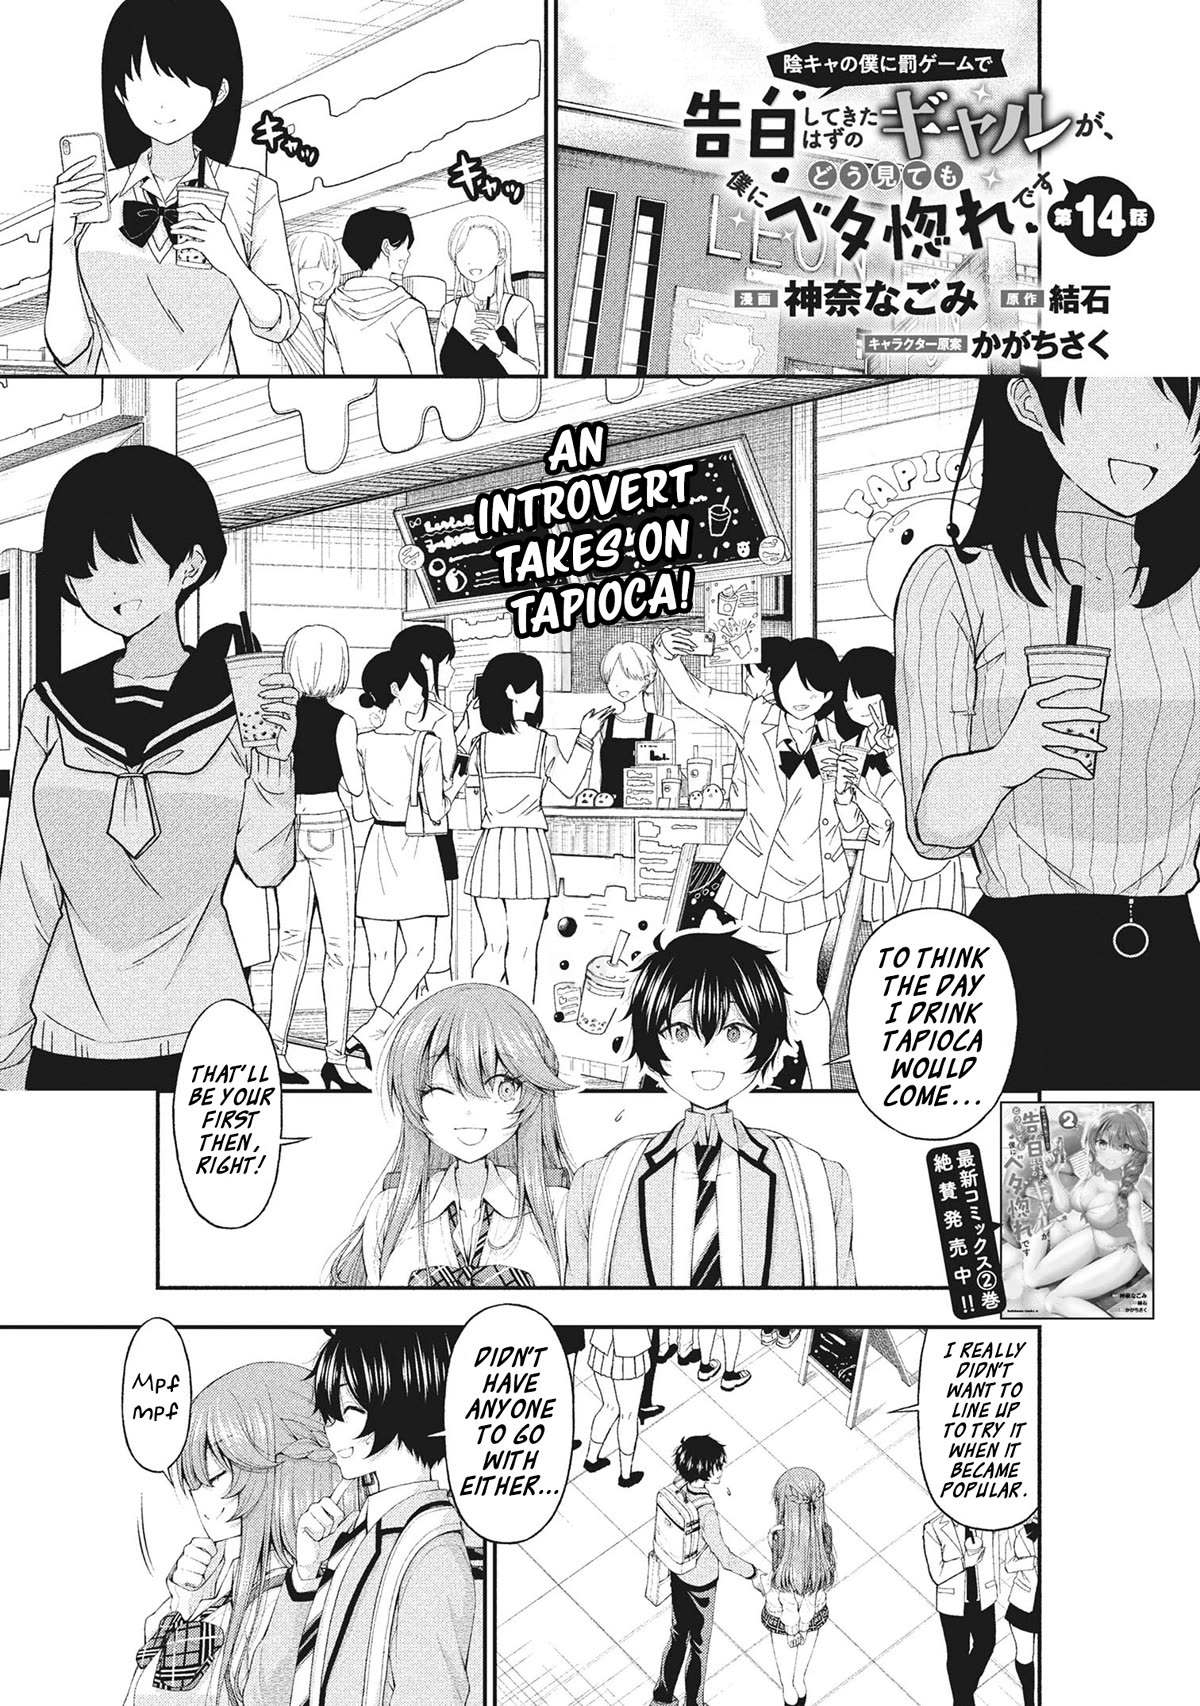 The Gal Who Was Meant to Confess to Me as a Game Punishment - chapter 14 - #1